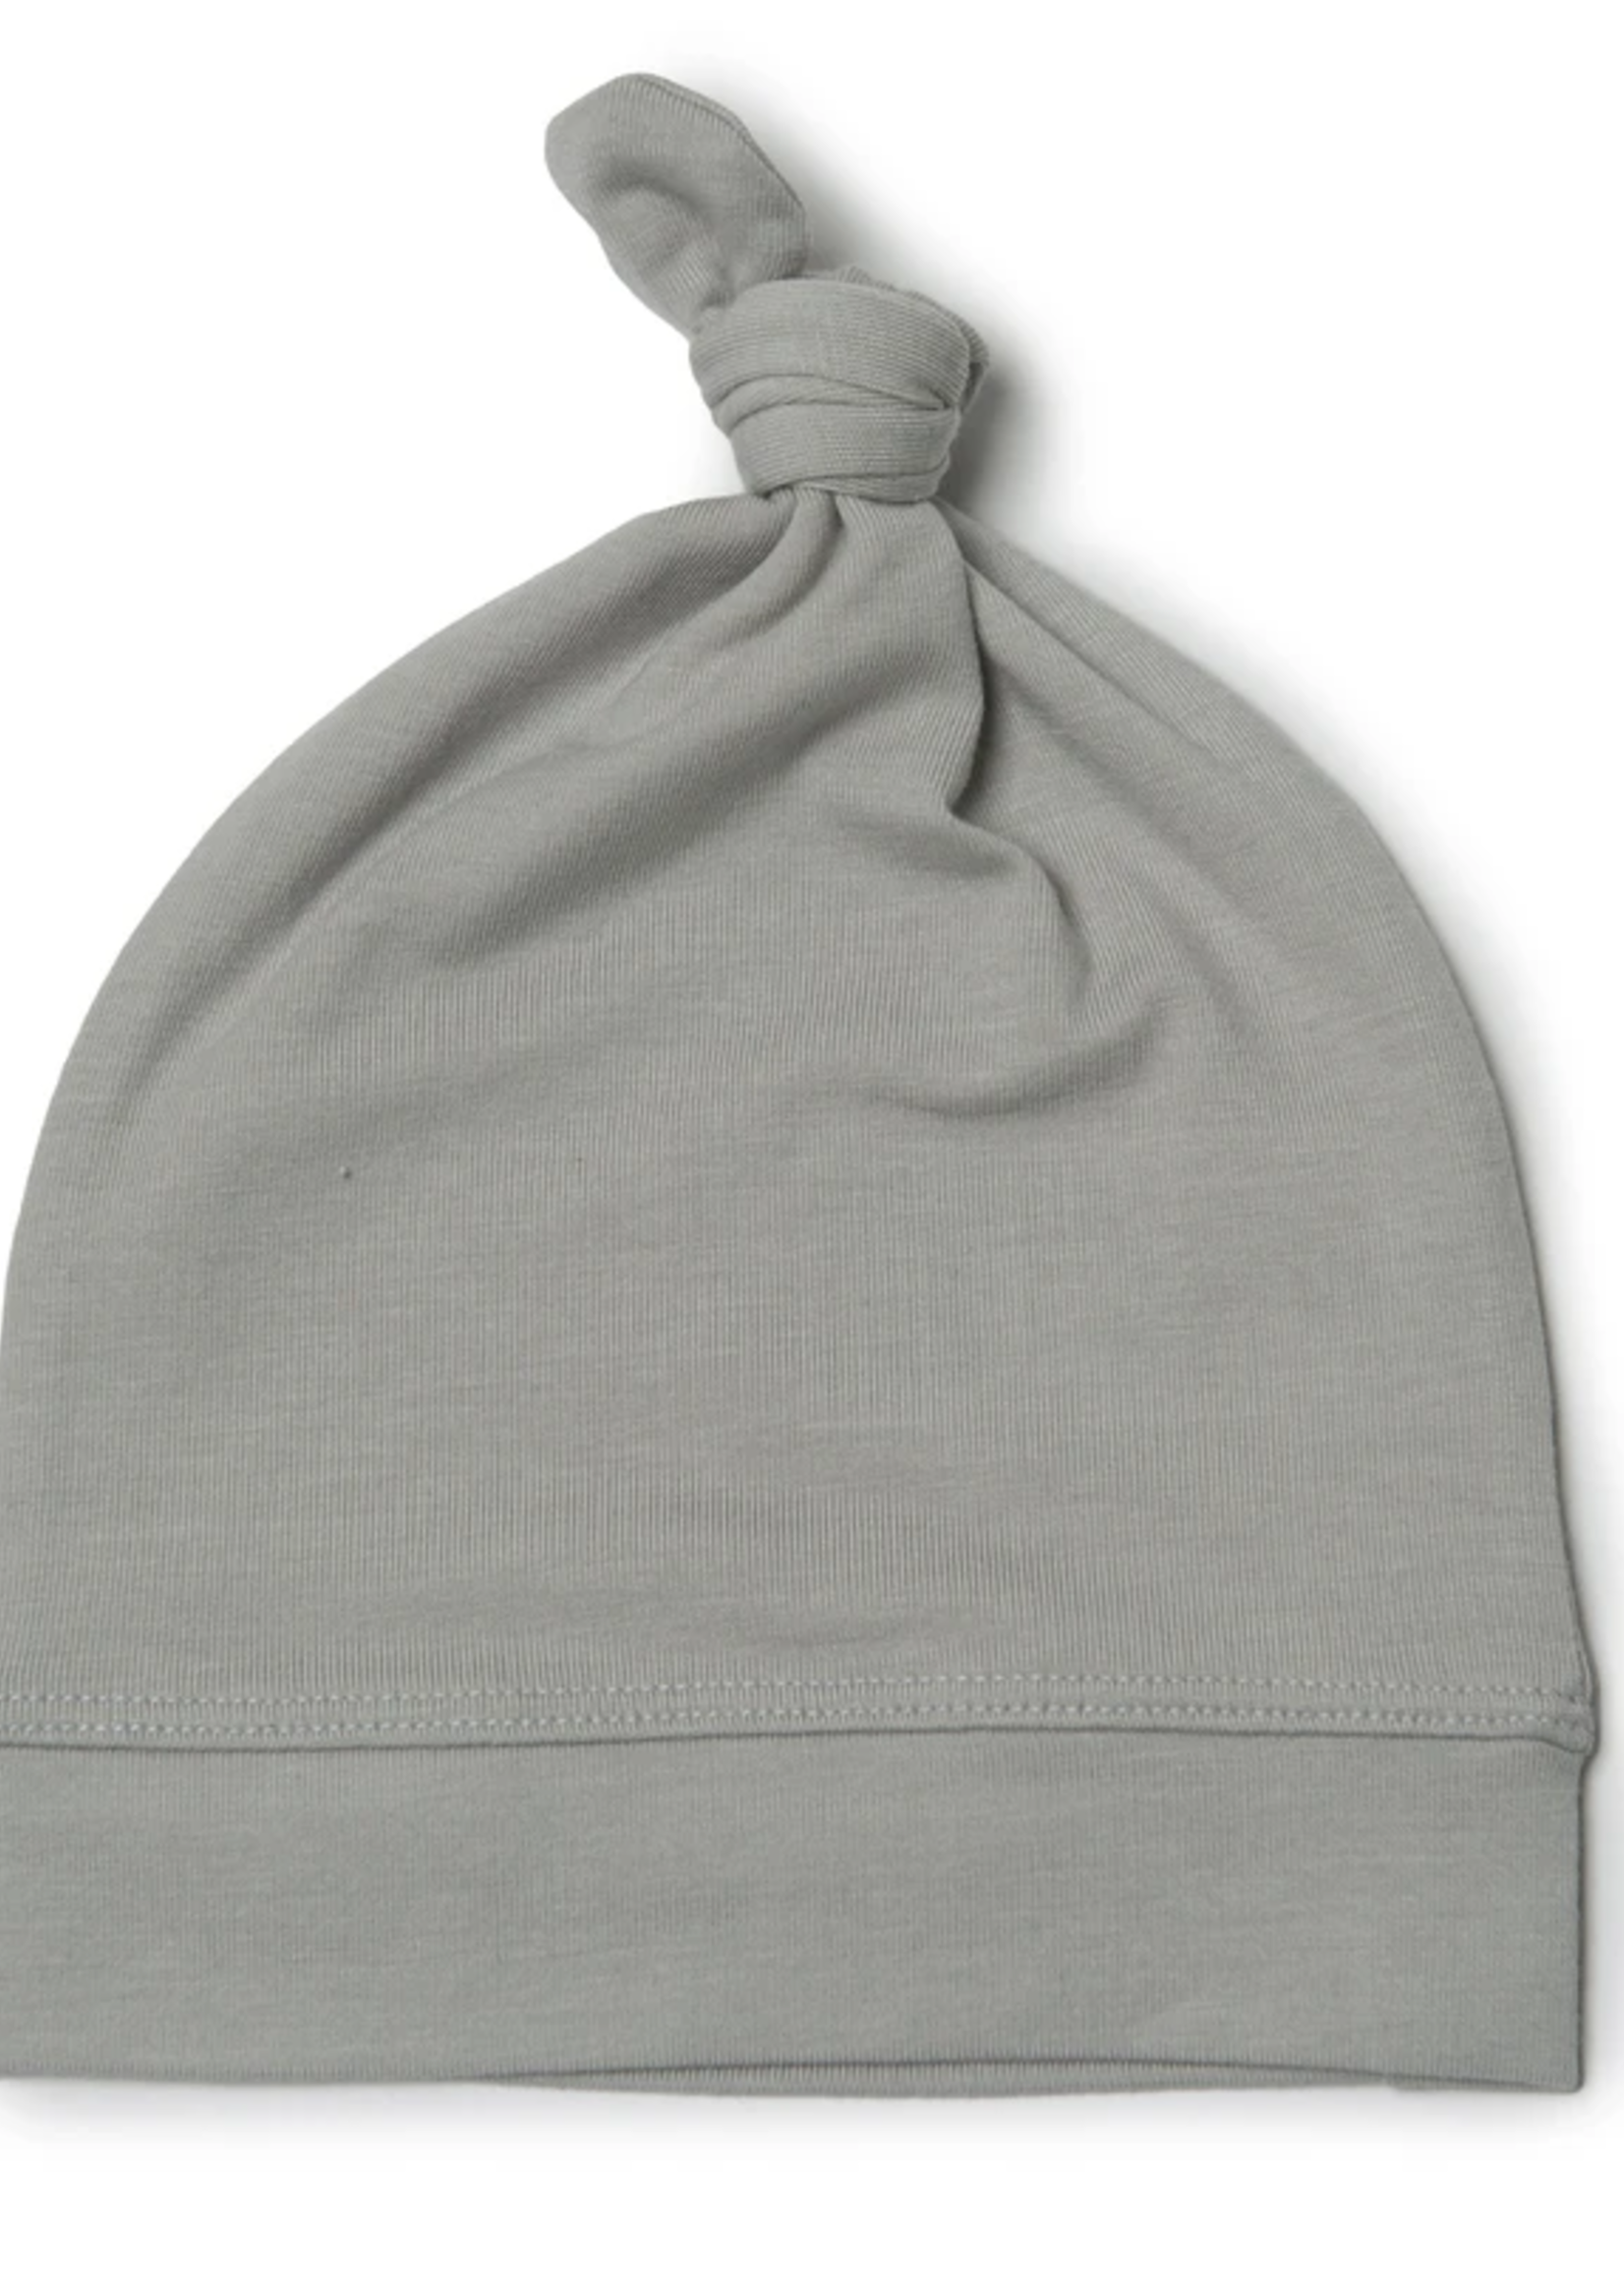 Elitaire Petite Top Knot Beanie in Morning Dew